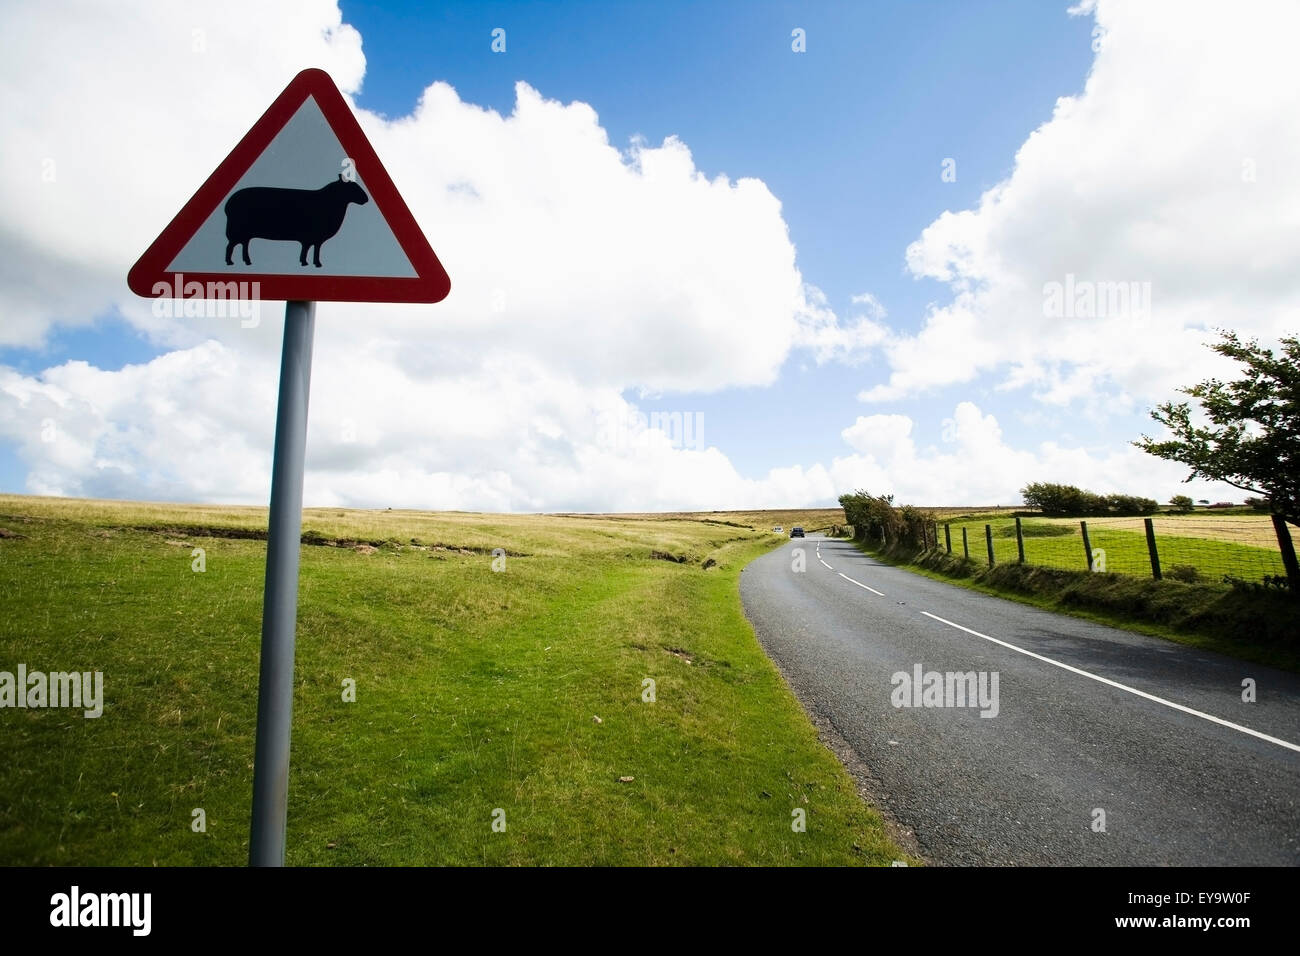 Sheep Warning Sign By Sweeping Bend On Road Side Stock Photo